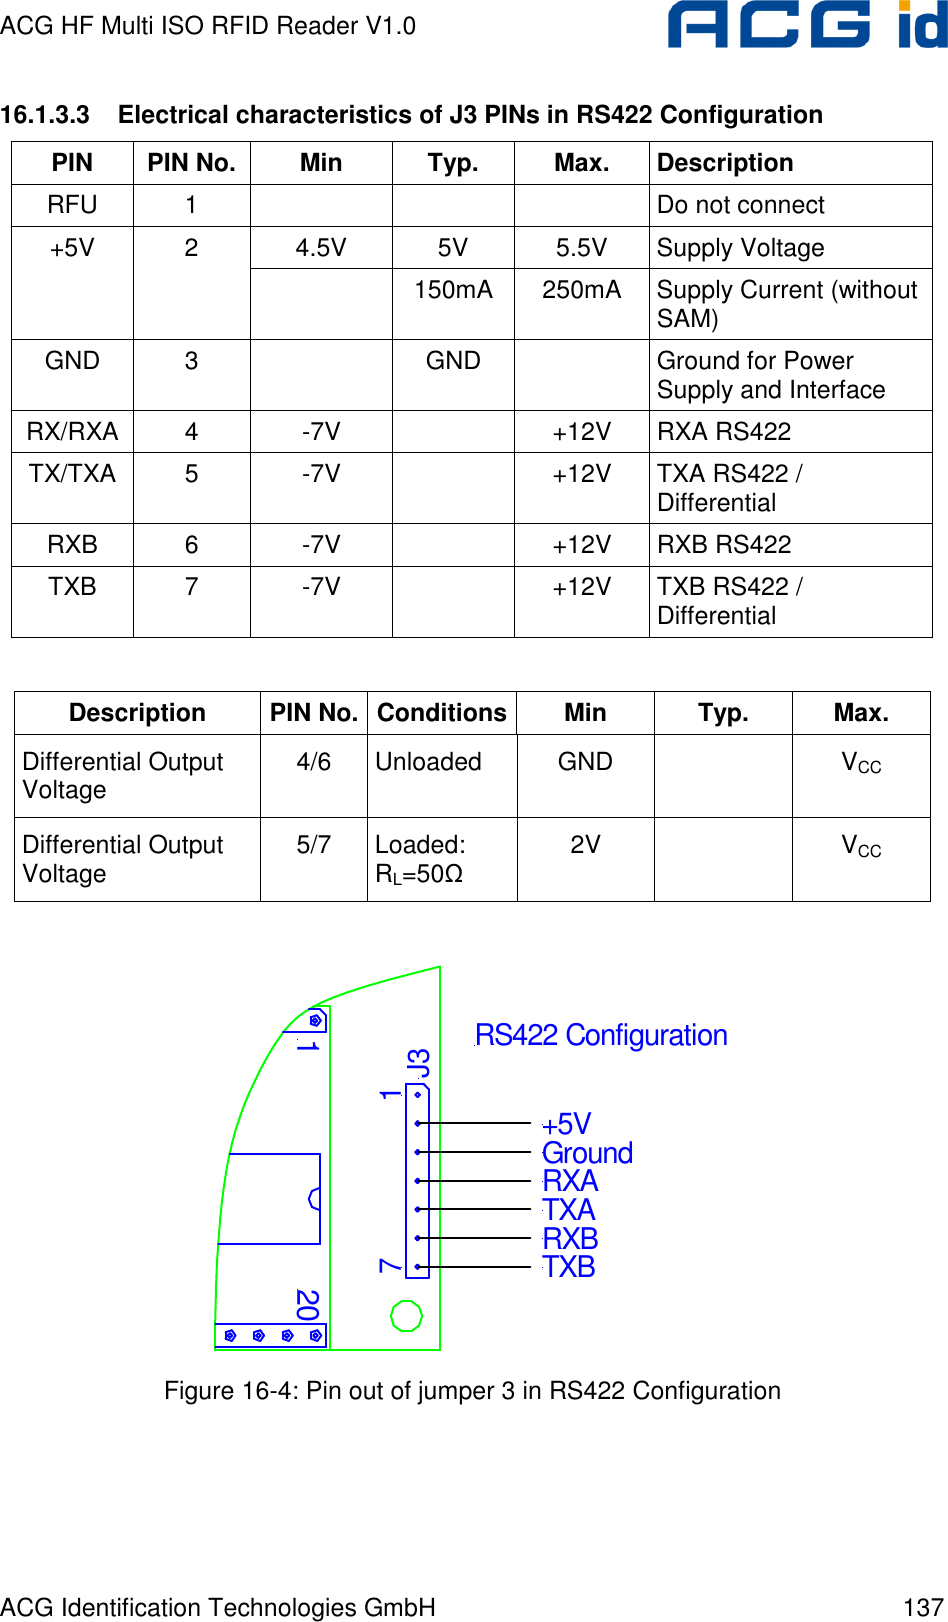 ACG HF Multi ISO RFID Reader V1.0 ACG Identification Technologies GmbH  137 16.1.3.3  Electrical characteristics of J3 PINs in RS422 Configuration PIN  PIN No.  Min  Typ.  Max.  Description RFU  1        Do not connect 4.5V  5V  5.5V  Supply Voltage +5V  2   150mA  250mA  Supply Current (without SAM) GND  3    GND    Ground for Power Supply and Interface RX/RXA 4  -7V    +12V  RXA RS422 TX/TXA  5  -7V    +12V  TXA RS422 / Differential RXB  6  -7V    +12V  RXB RS422 TXB  7  -7V    +12V  TXB RS422 / Differential  Description  PIN No. Conditions Min  Typ.  Max. Differential Output Voltage  4/6  Unloaded  GND    VCC Differential Output Voltage  5/7  Loaded: RL=50Ω 2V    VCC  12017J3+5VGroundRXATXARS422 ConfigurationRXBTXB Figure 16-4: Pin out of jumper 3 in RS422 Configuration  